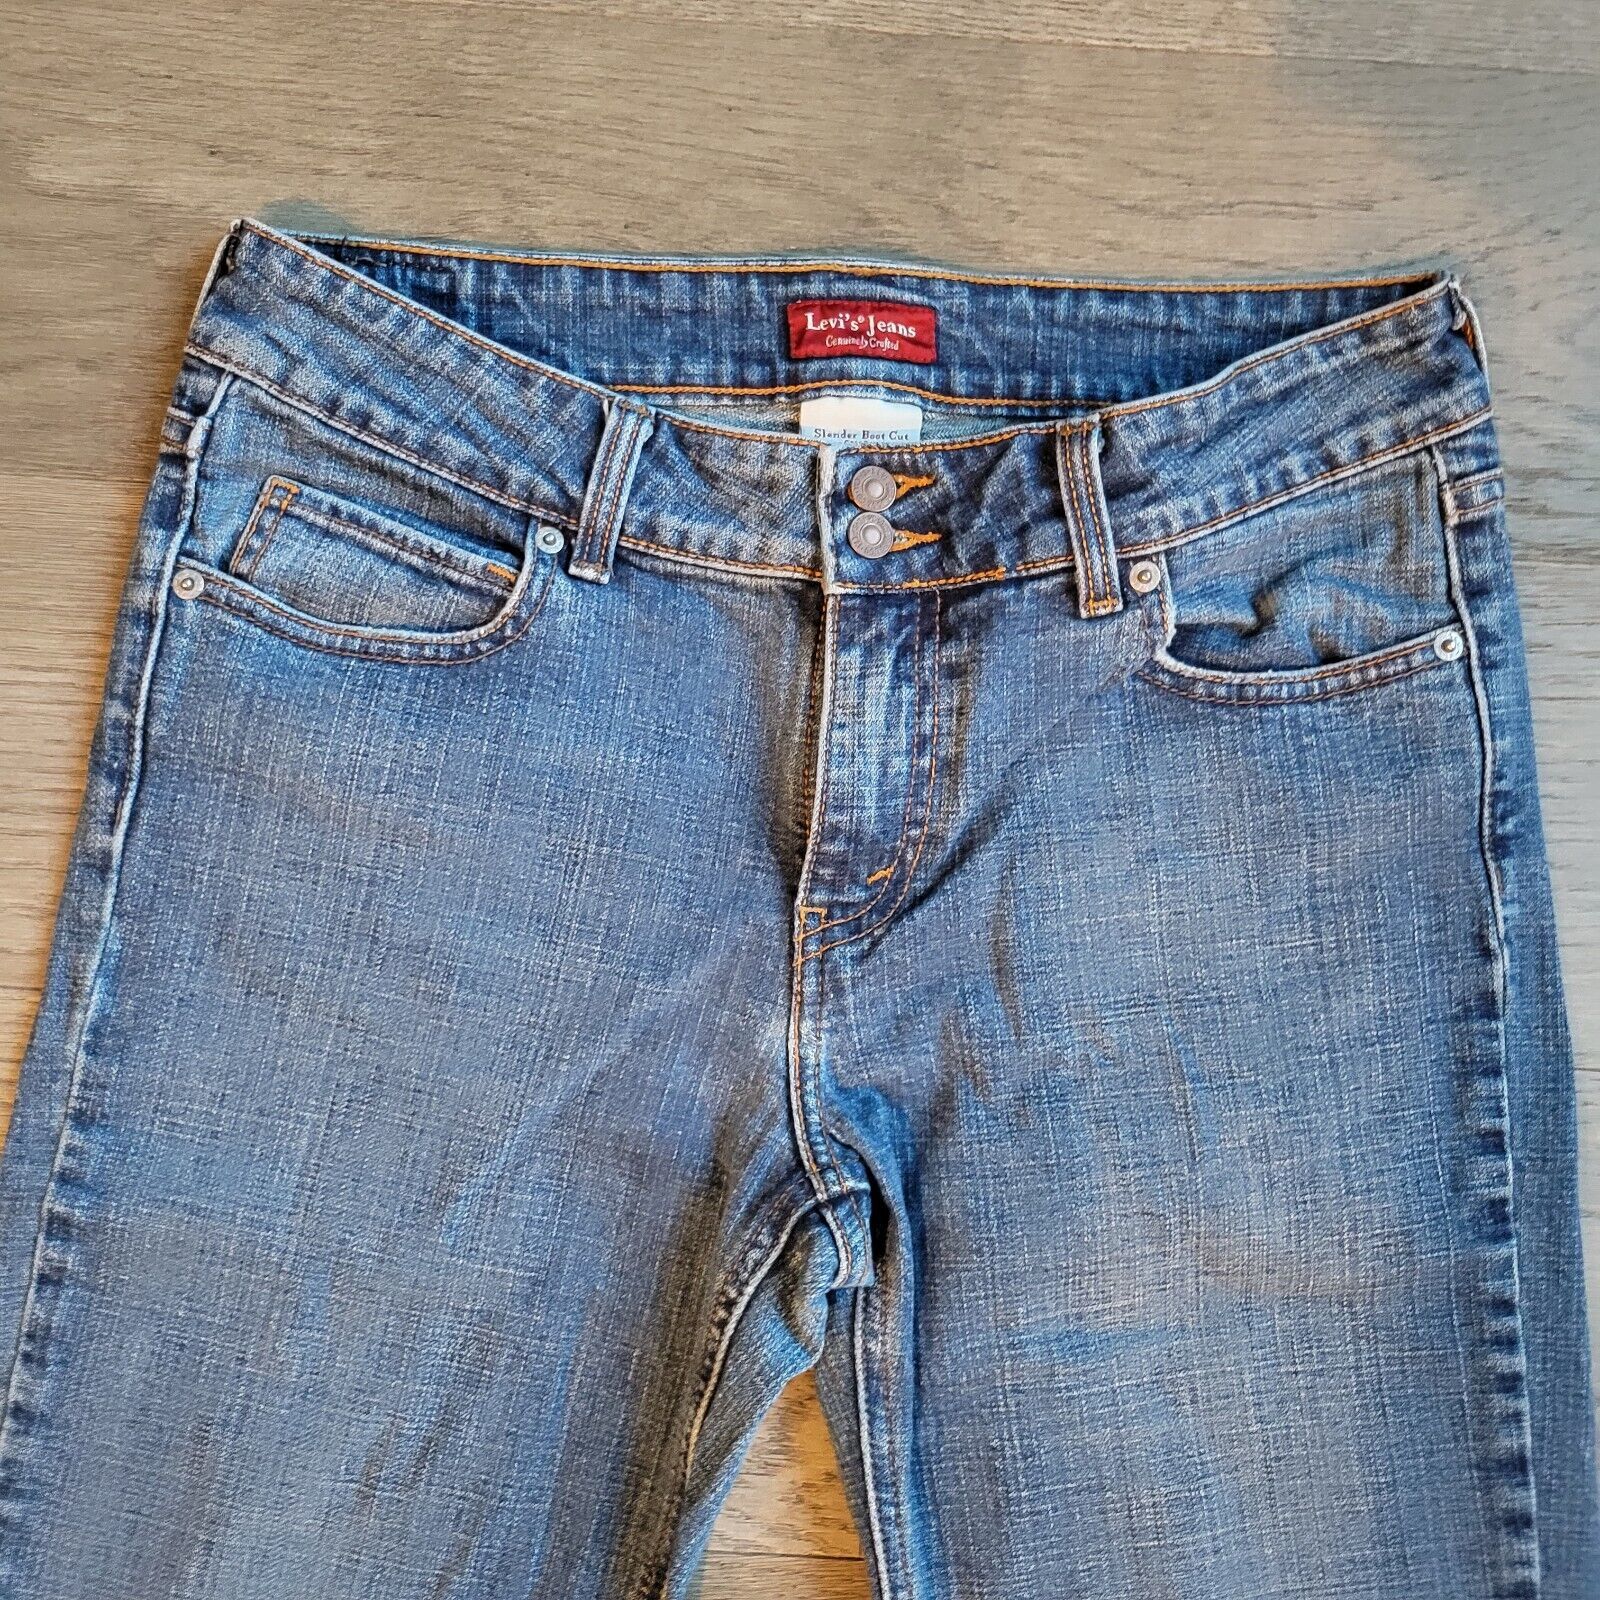 Primary image for Levis Genuinely Crafted 526 Jeans Slender Boot Cut Stretch Denim Womens 8 Medium